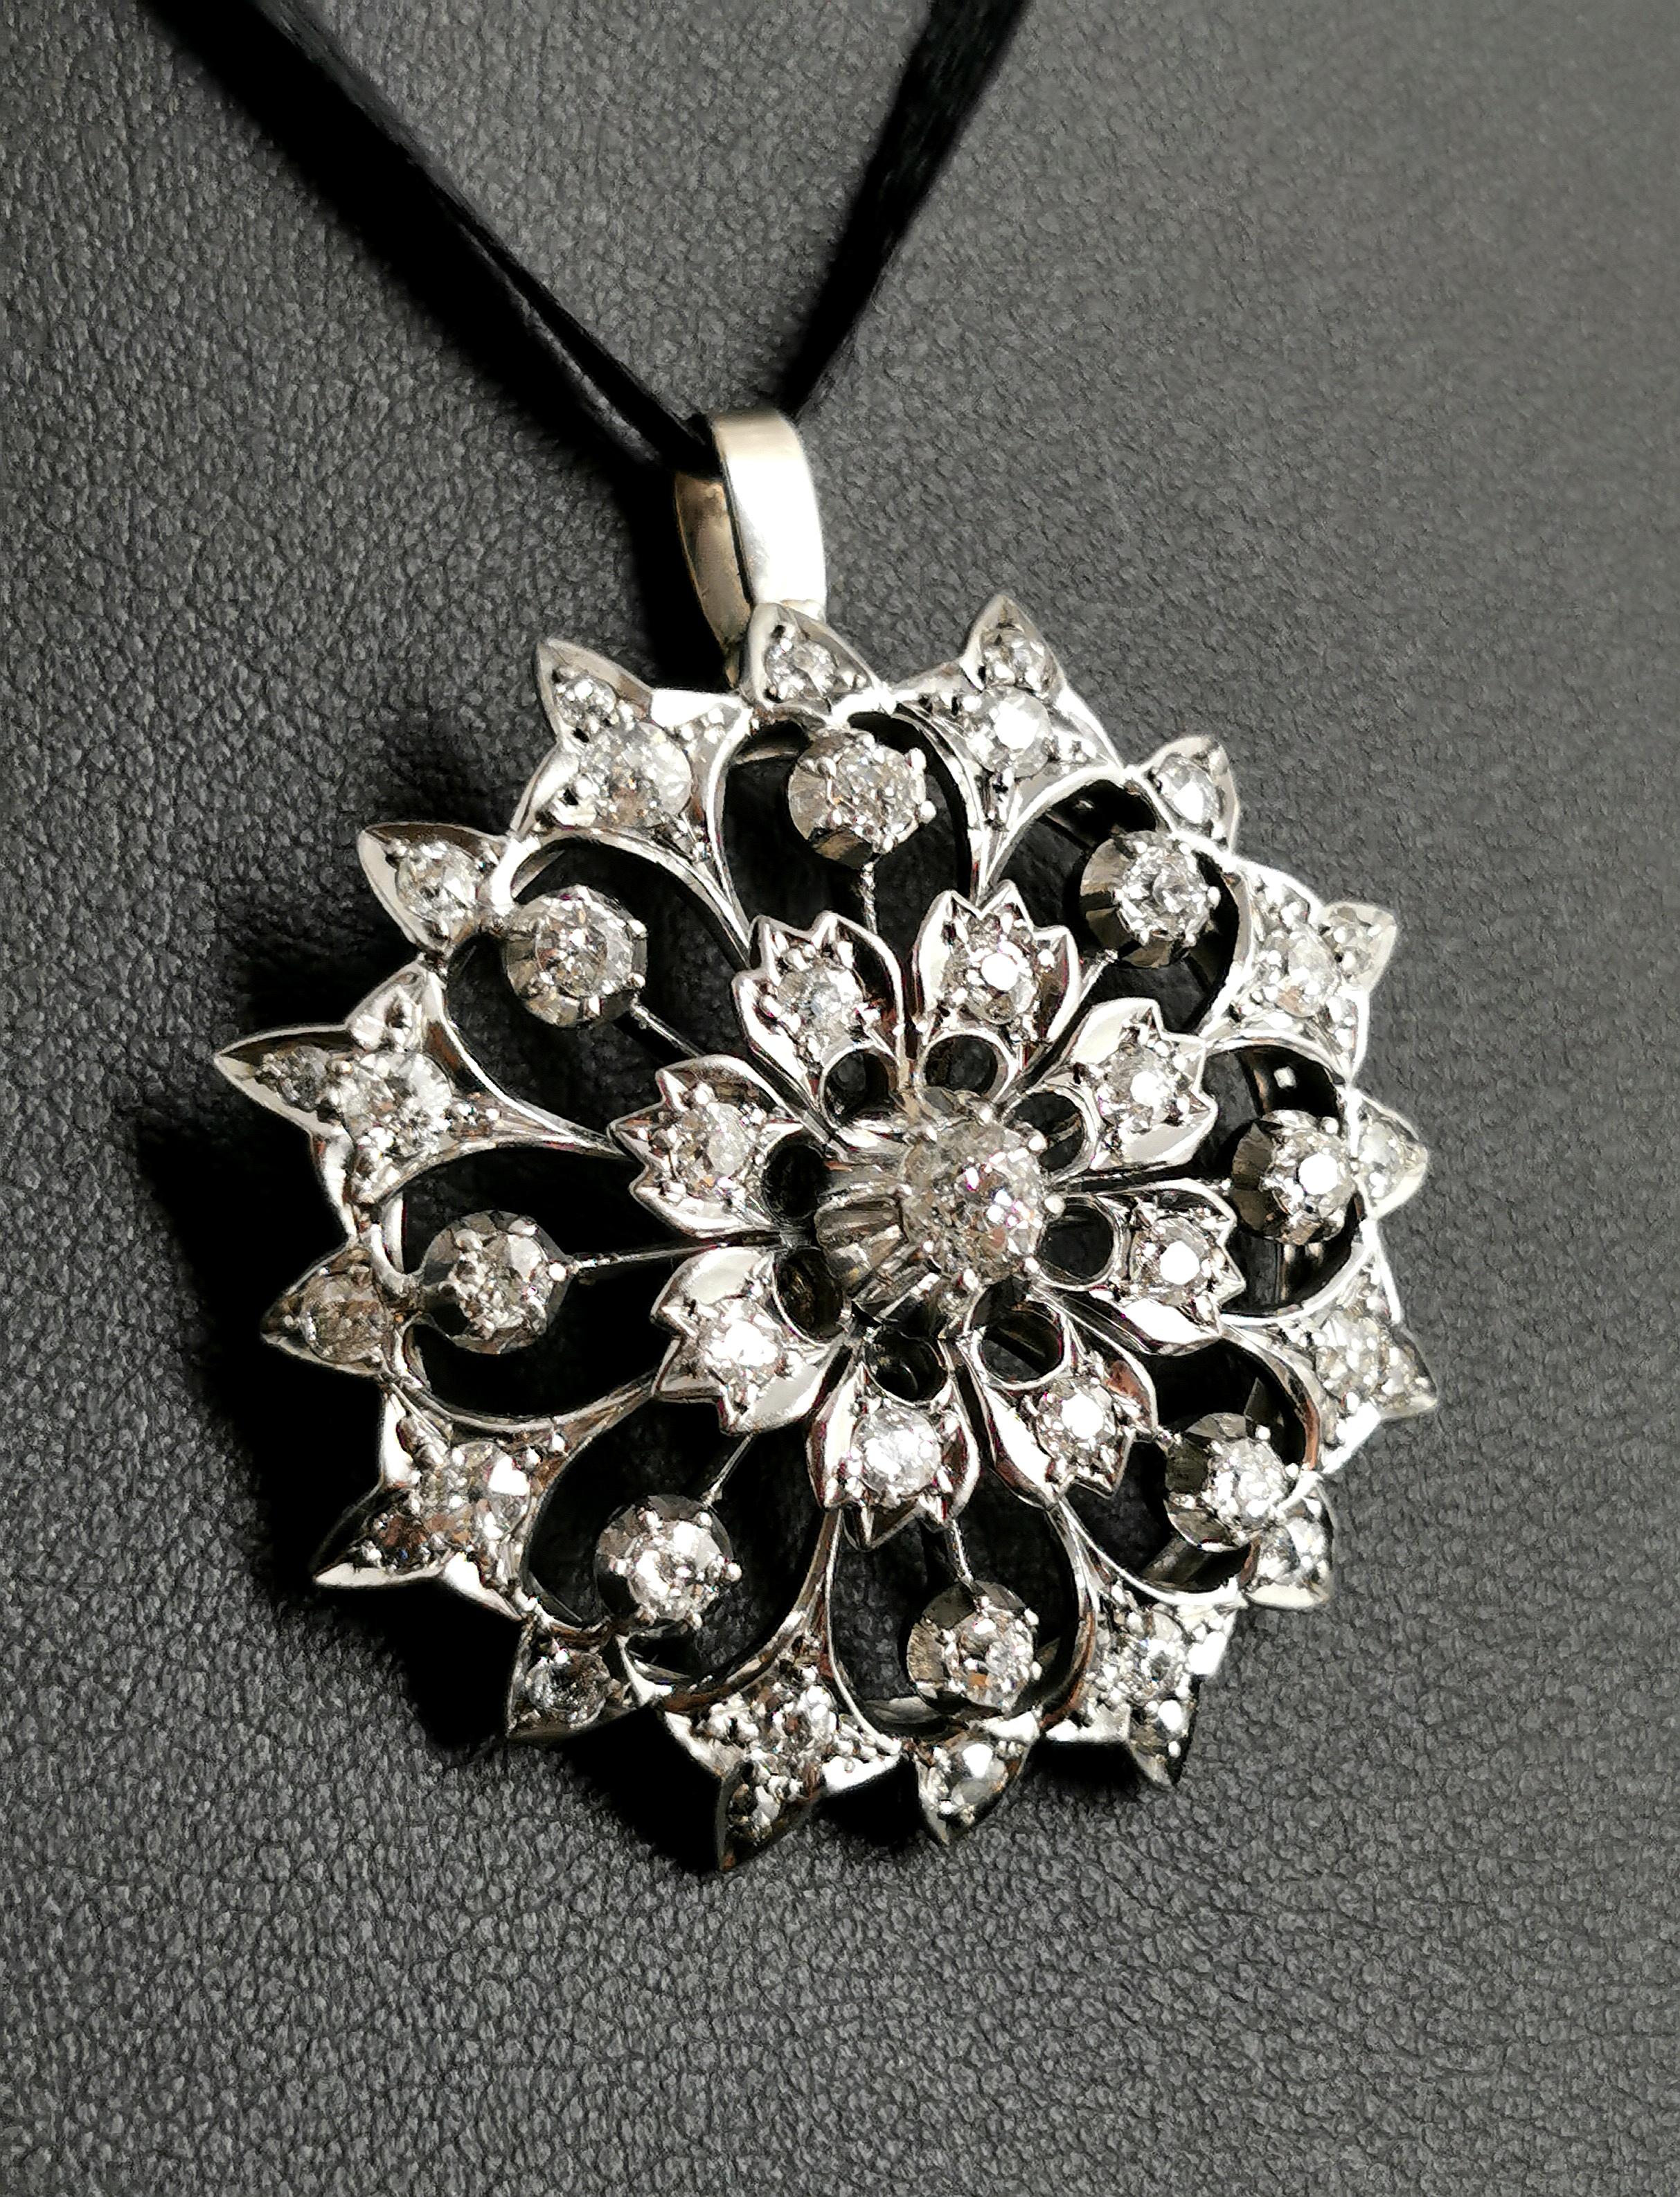 This absolutely stunning Victorian diamond pendant is truly a showstopper!

This beautifully master crafted piece is both elegant and statement at the same time, the pendant has a beautiful openwork floral design giving it a lovely feminine vibe and